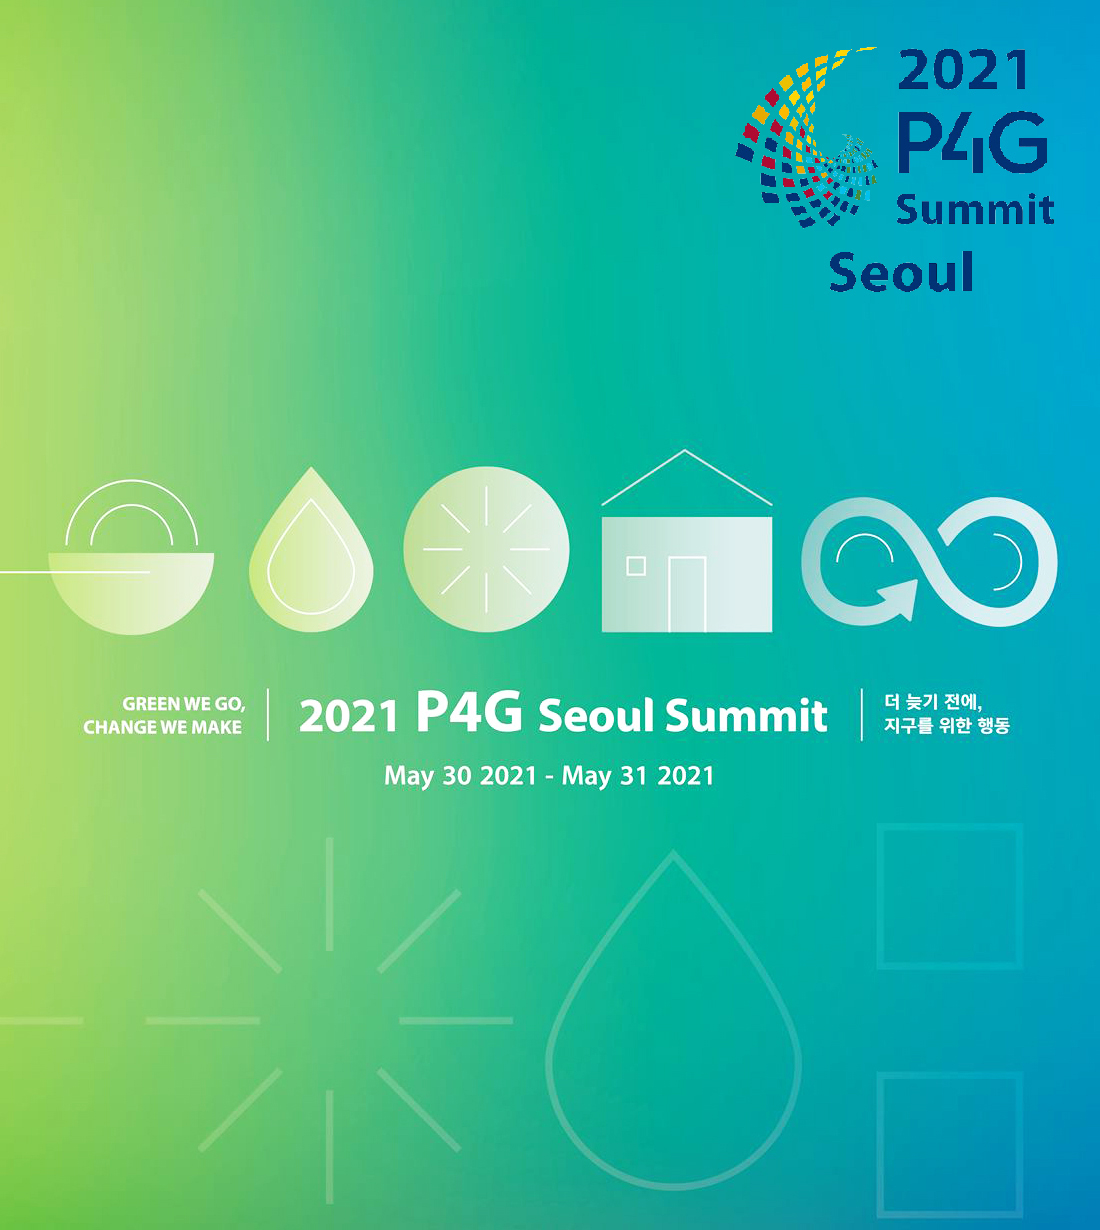 Participation in 2021 P4G Seoul Summit